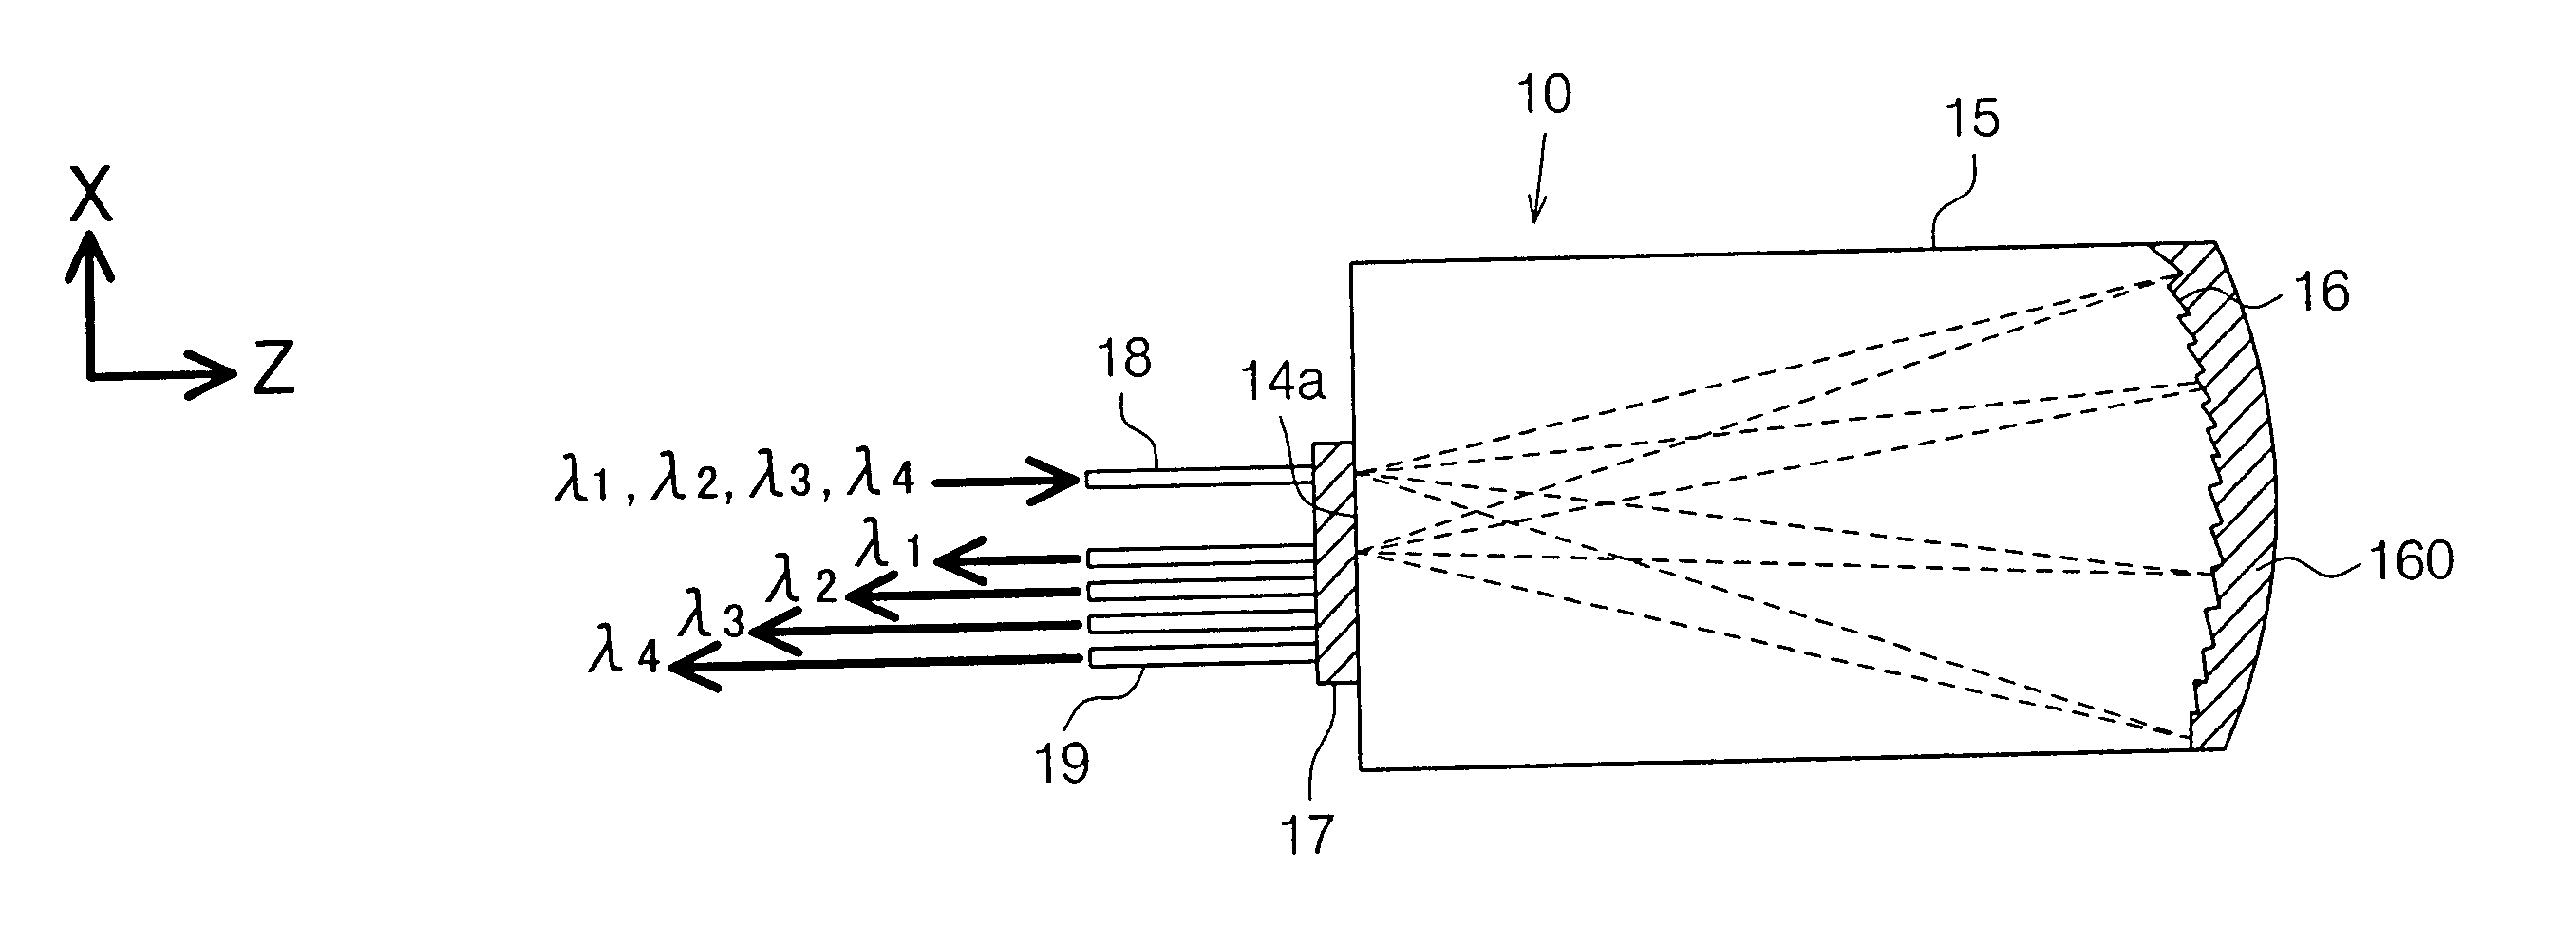 Diffraction device using photonic crystal